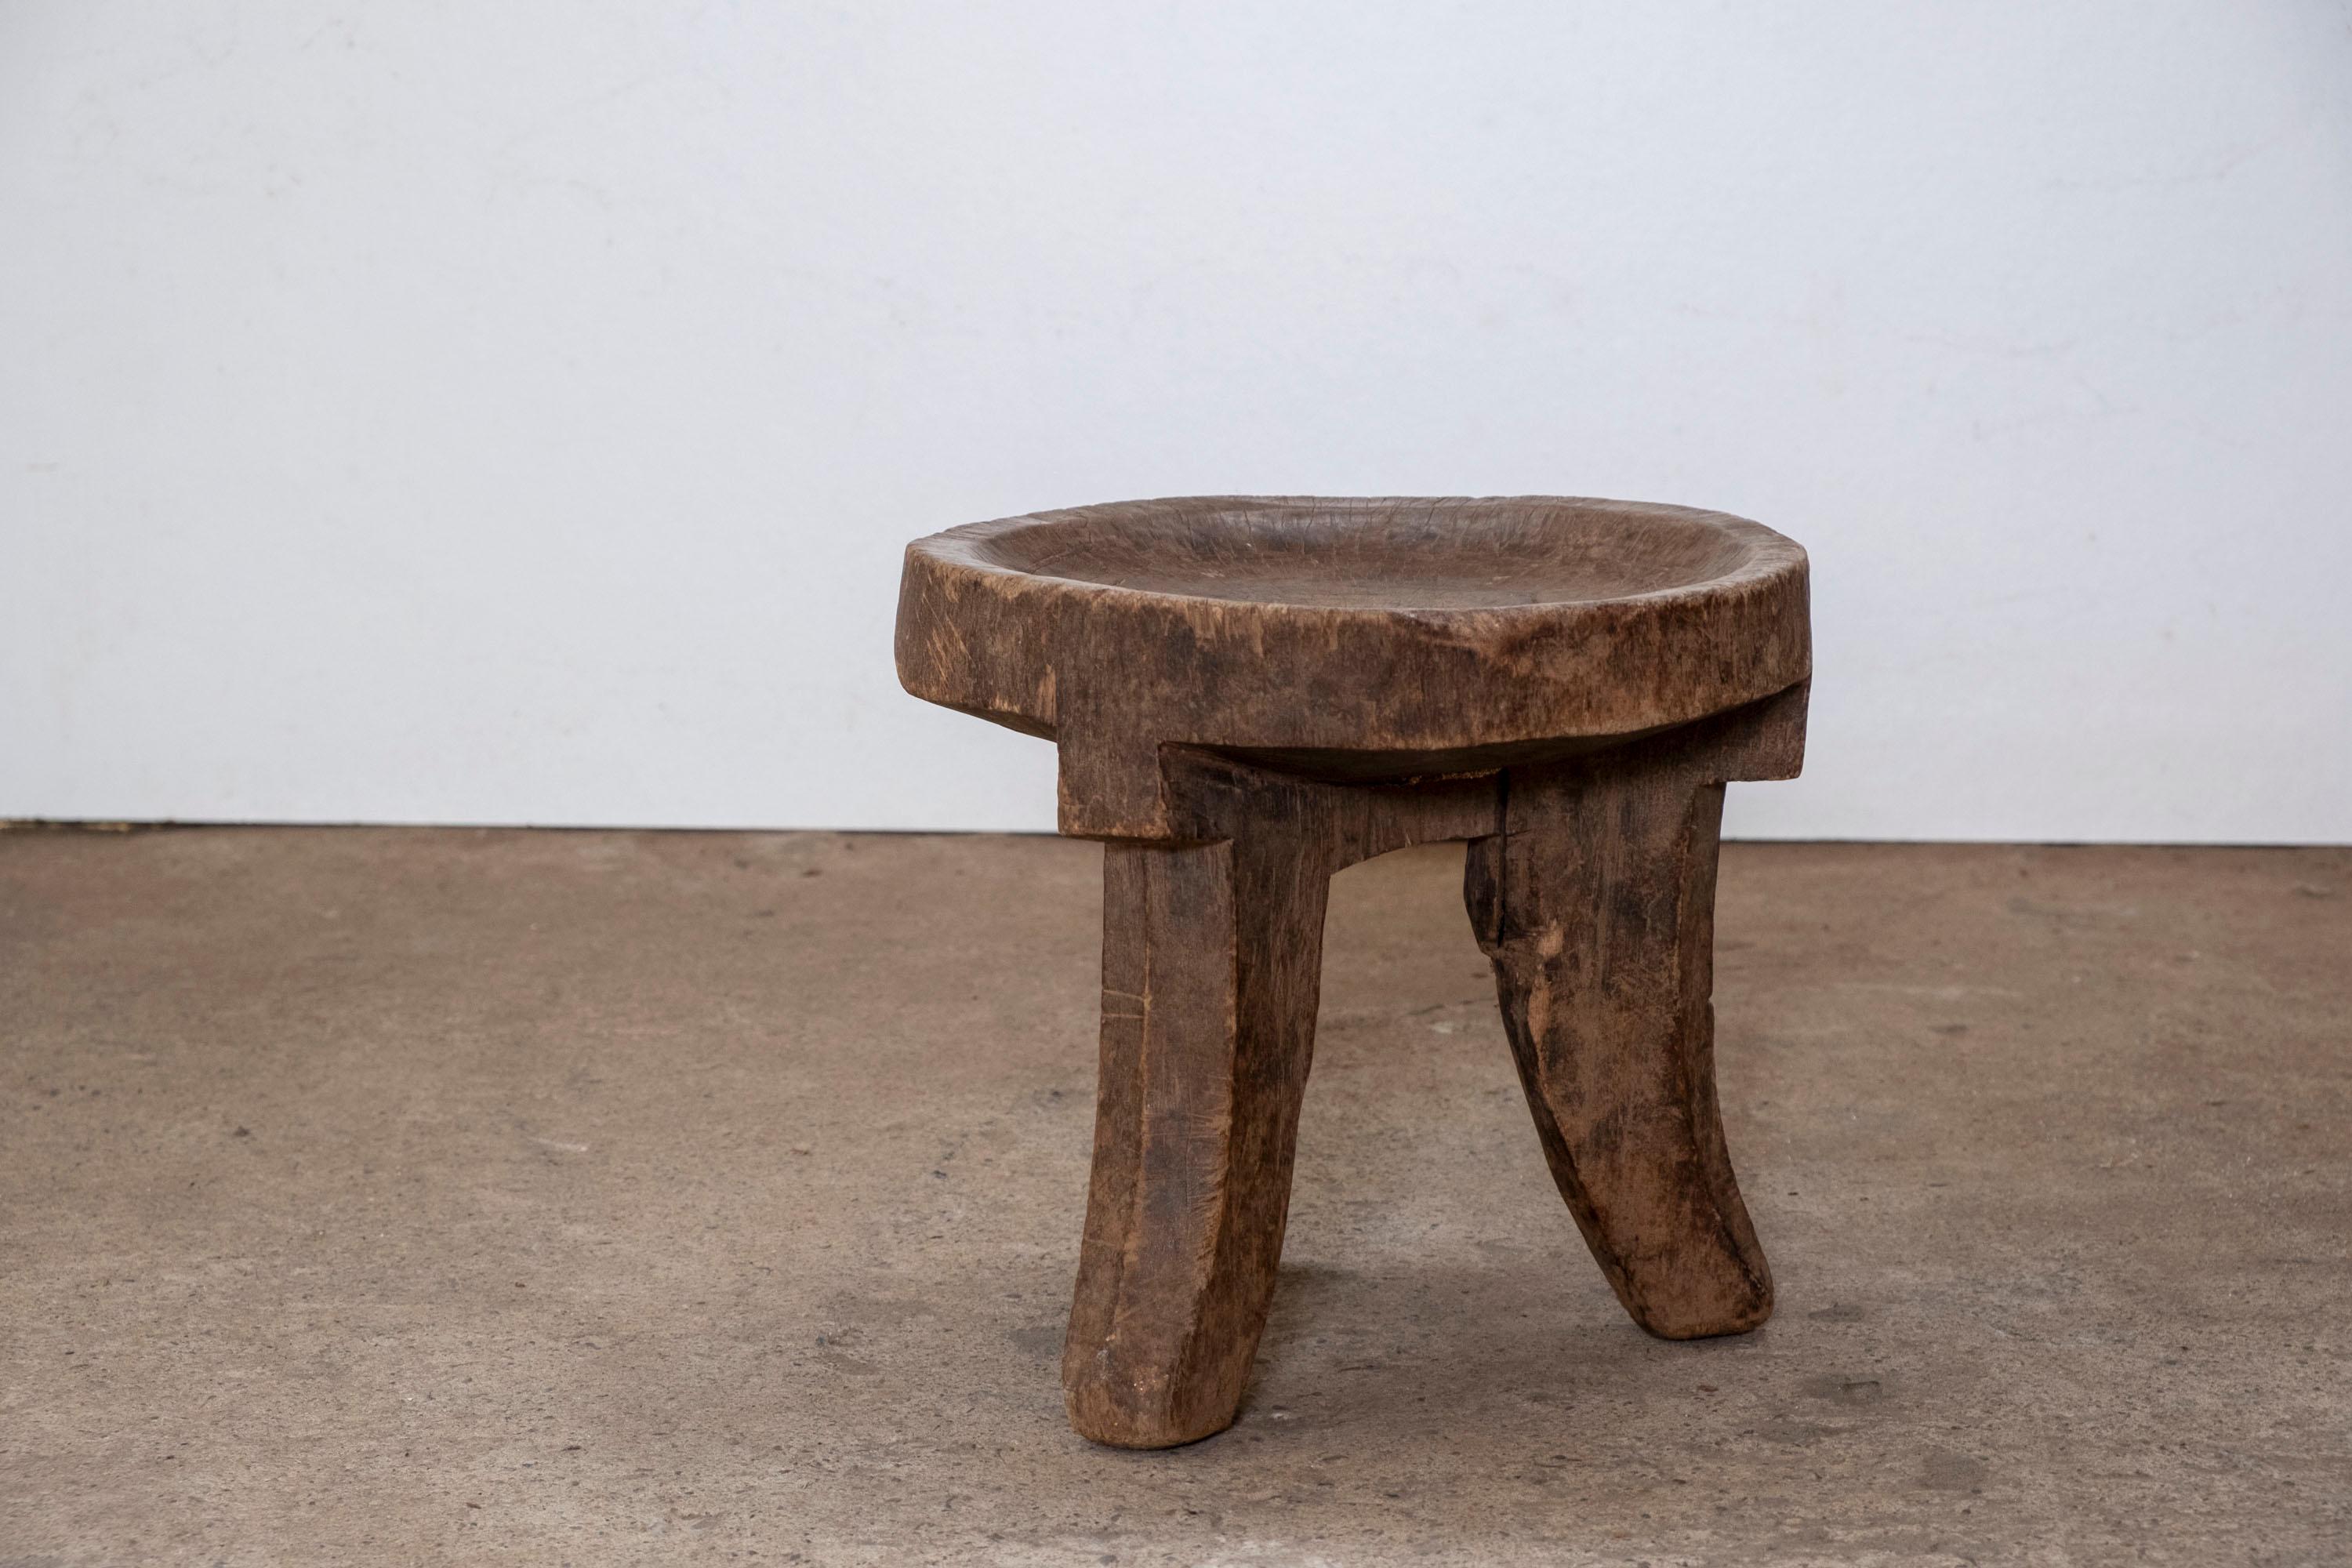 Sculptural side table or stool hand carved from a single piece of wood.